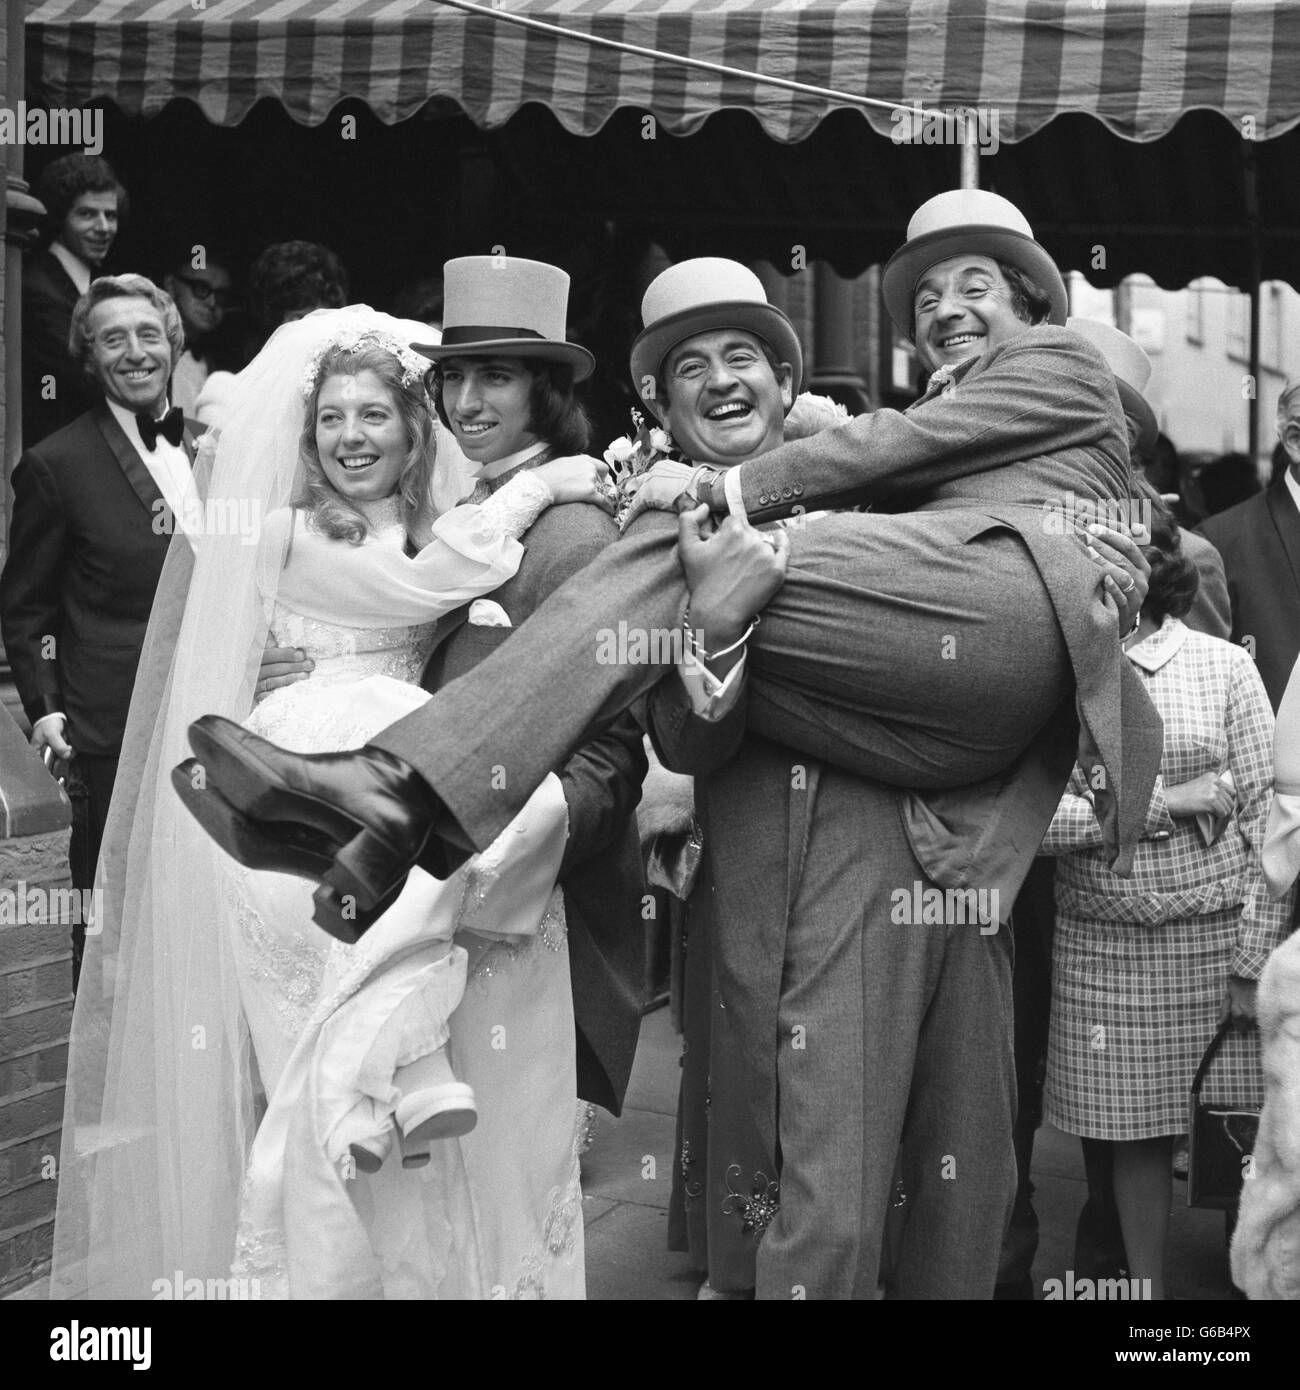 Mike Winters is lifted by brother Bernie, as the bride Beverley Wise - their niece - is lifted by groom Lawrence Swycher. They married at the West End Synagogue in St Petersburgh Place, London. Stock Photo